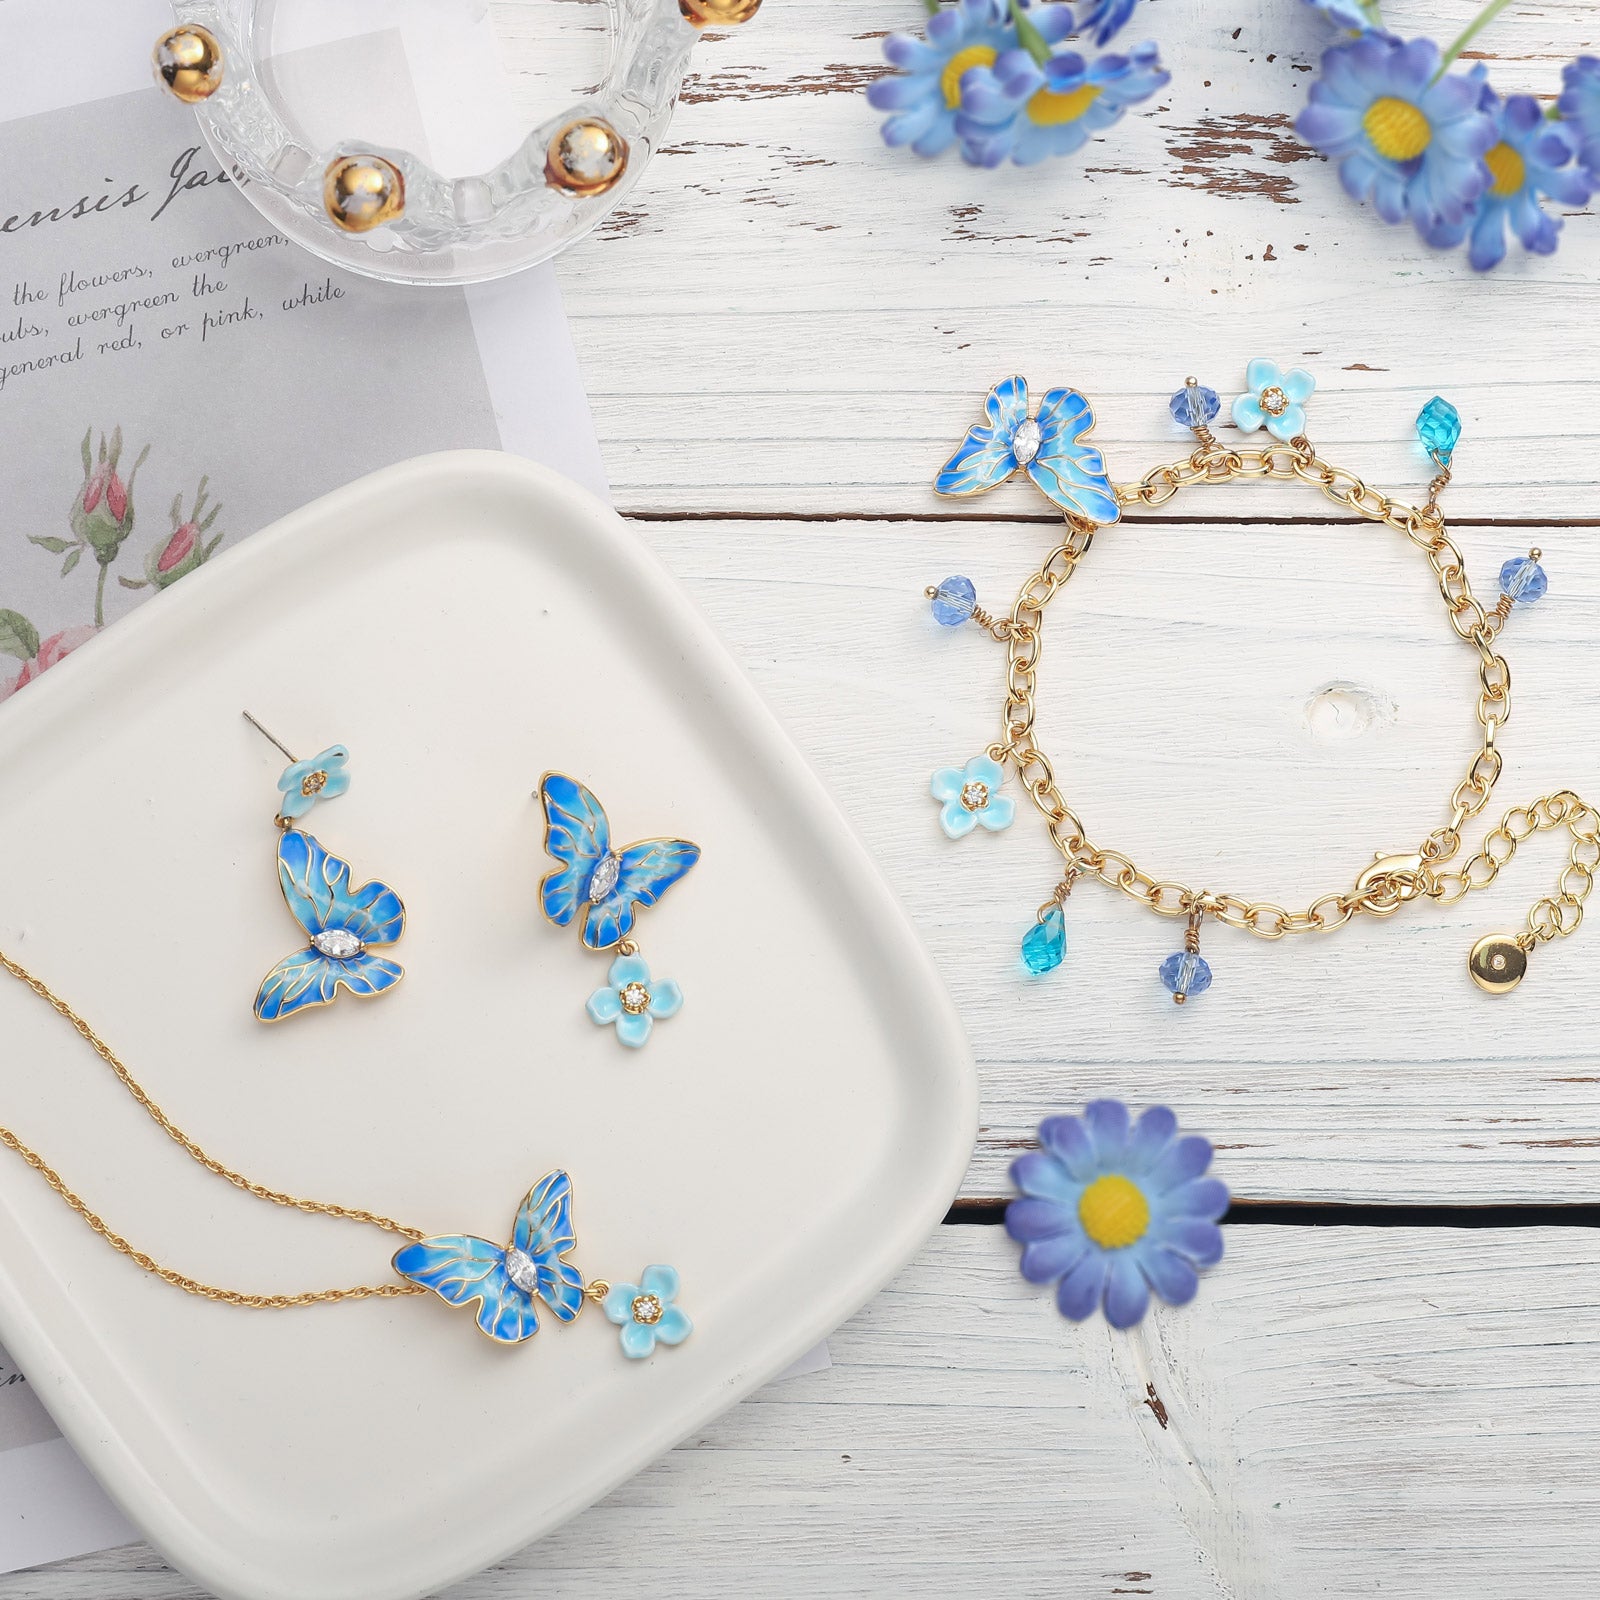 Blue Morpho Butterfly Jewelry Gift Set with Gift Wrapping